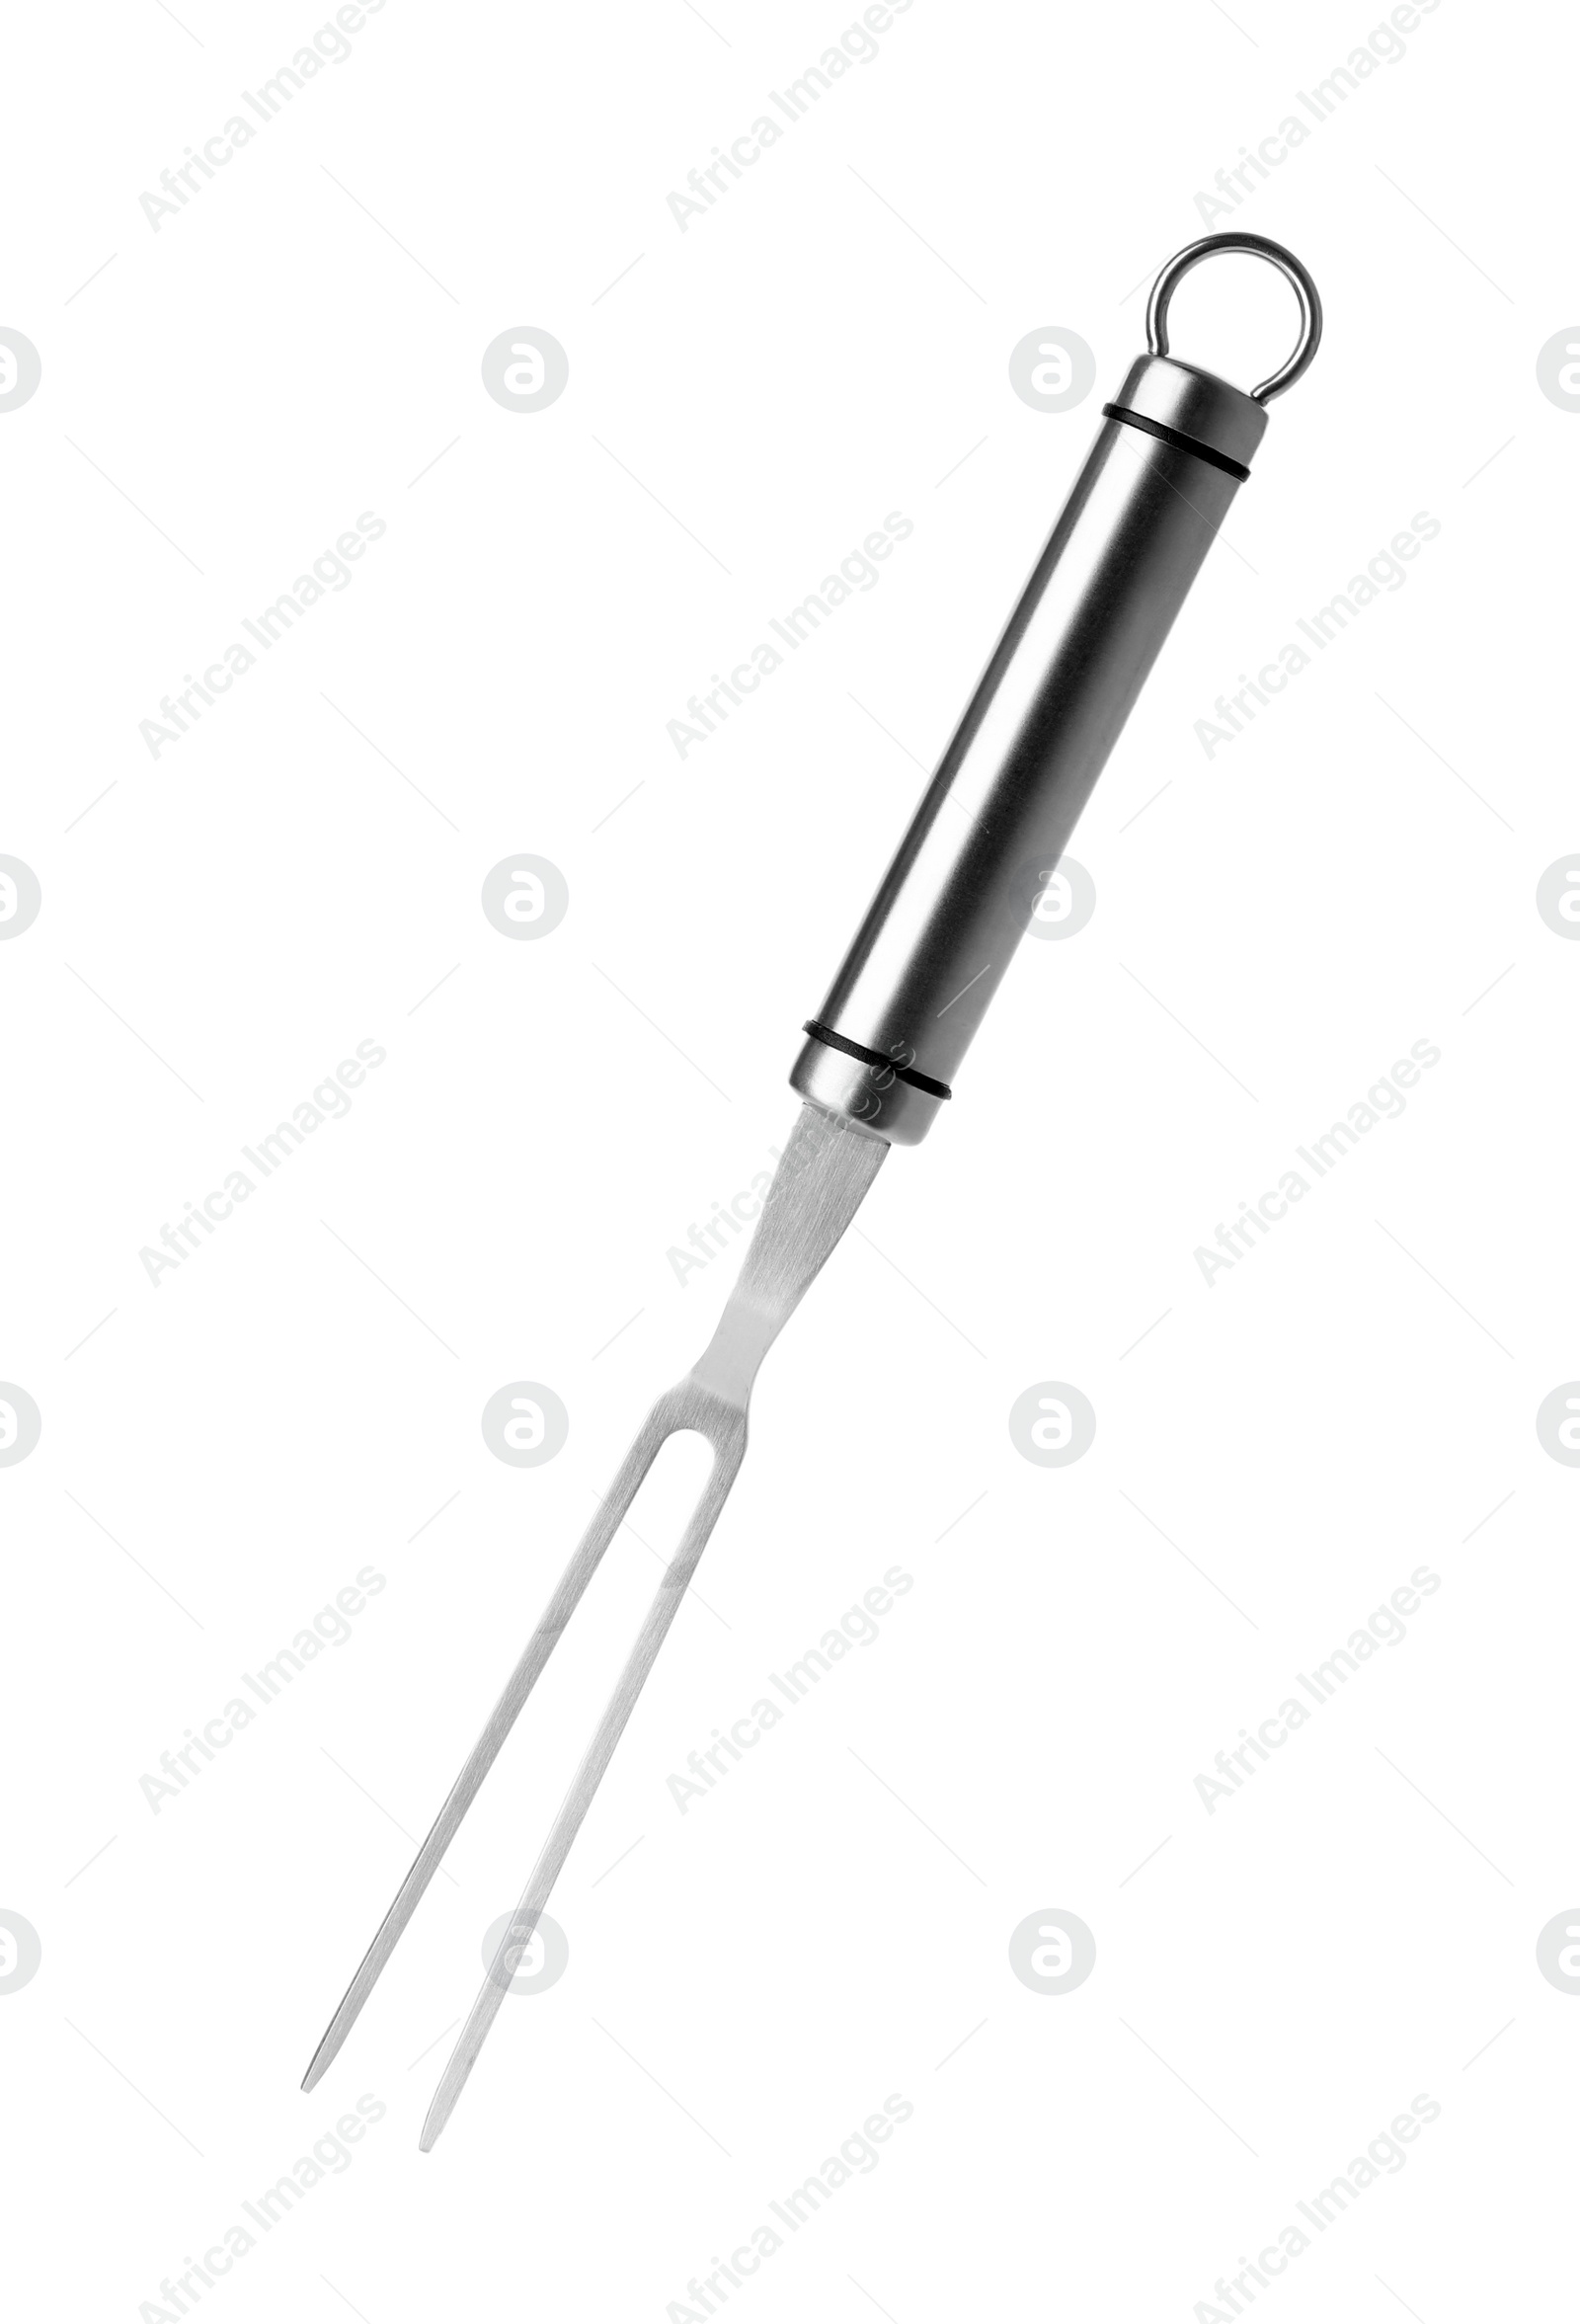 Photo of Stainless steel meat fork on white background. Kitchen utensils